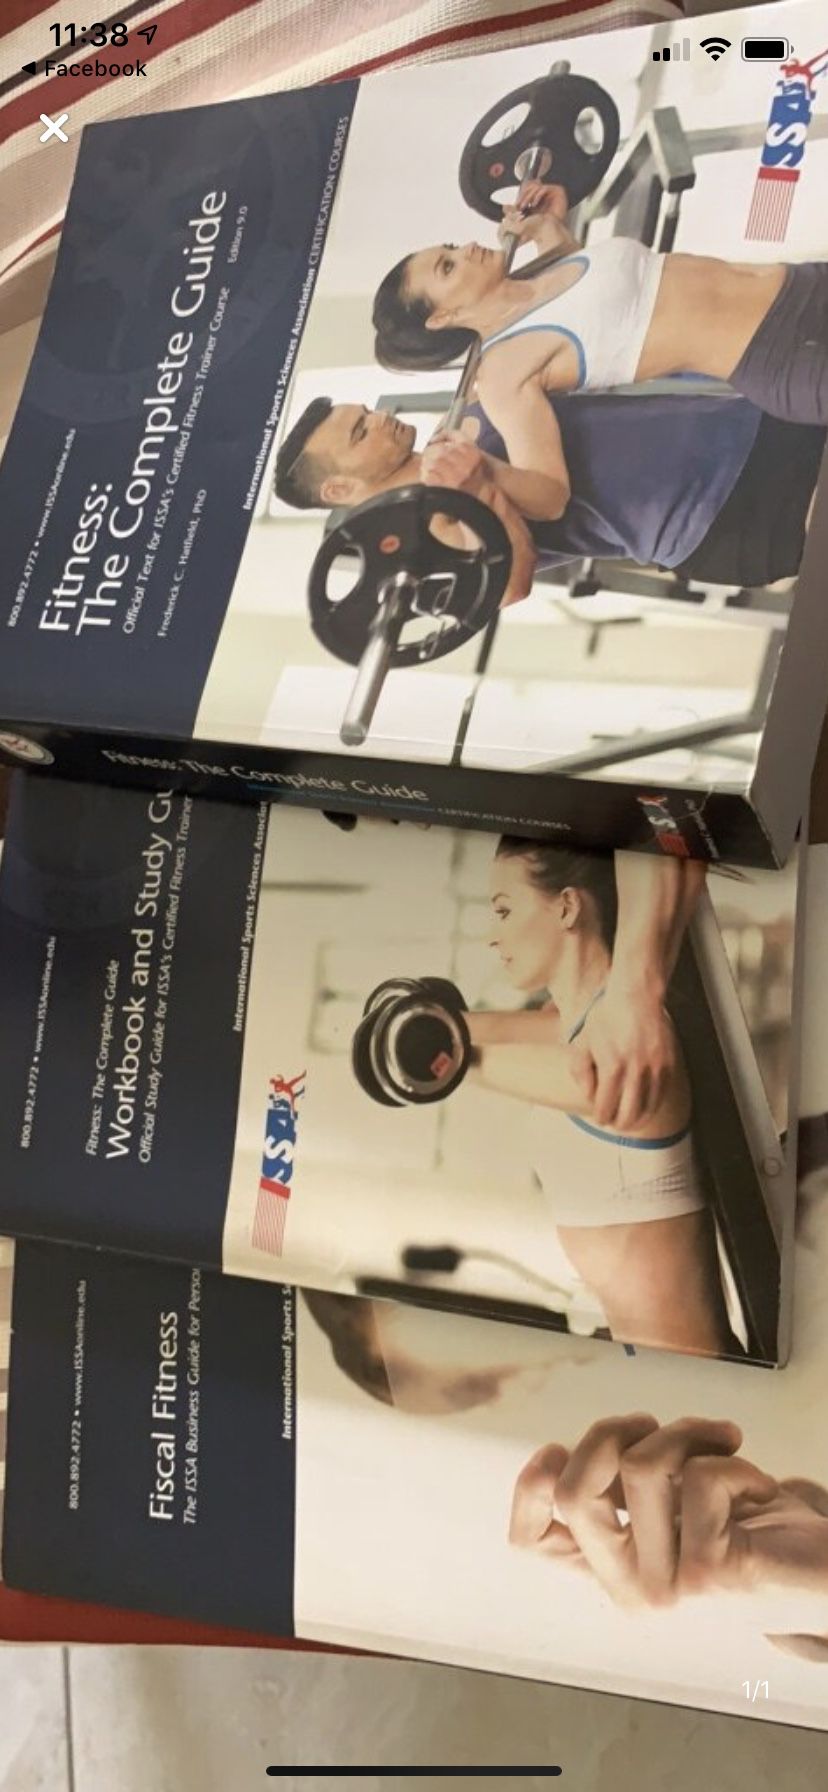 ISSA Fitness: The complete Guide/Personal Trainer required course materials